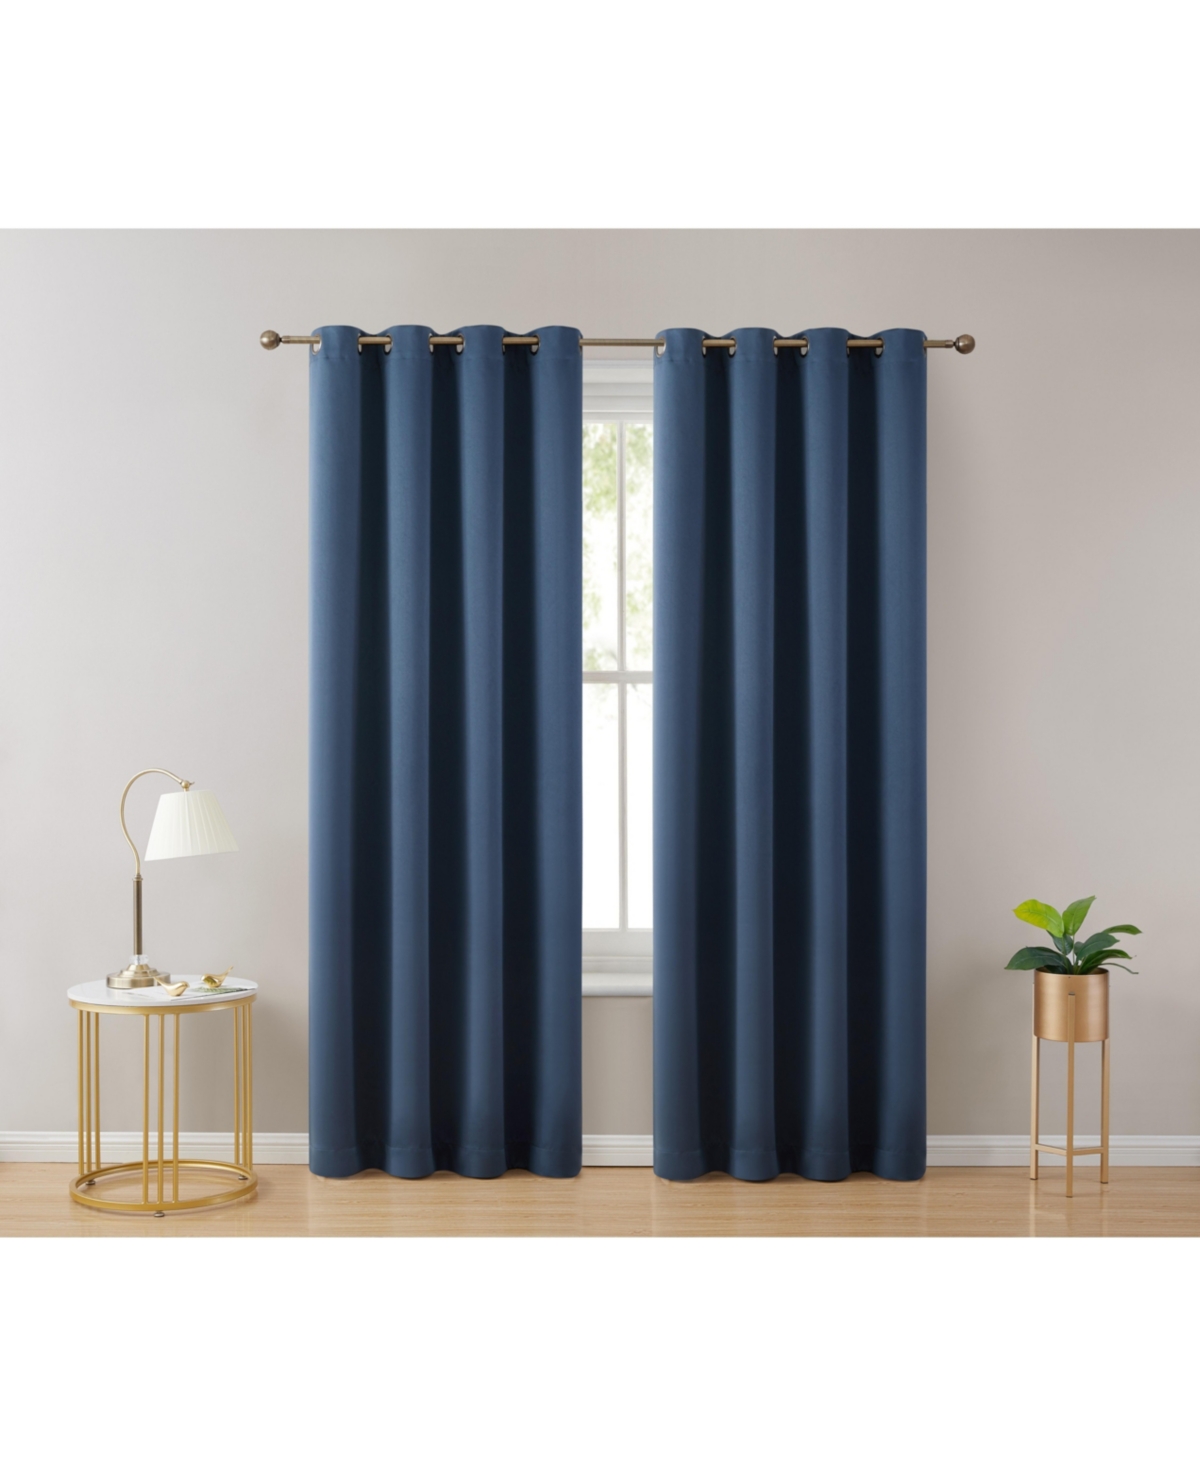 Laurance Full Shaded Blackout Curtains - Thermal Insulation Light Blocking Home Theater Grommet Window Drapery Basement Curtains, Set of 2 - Mi